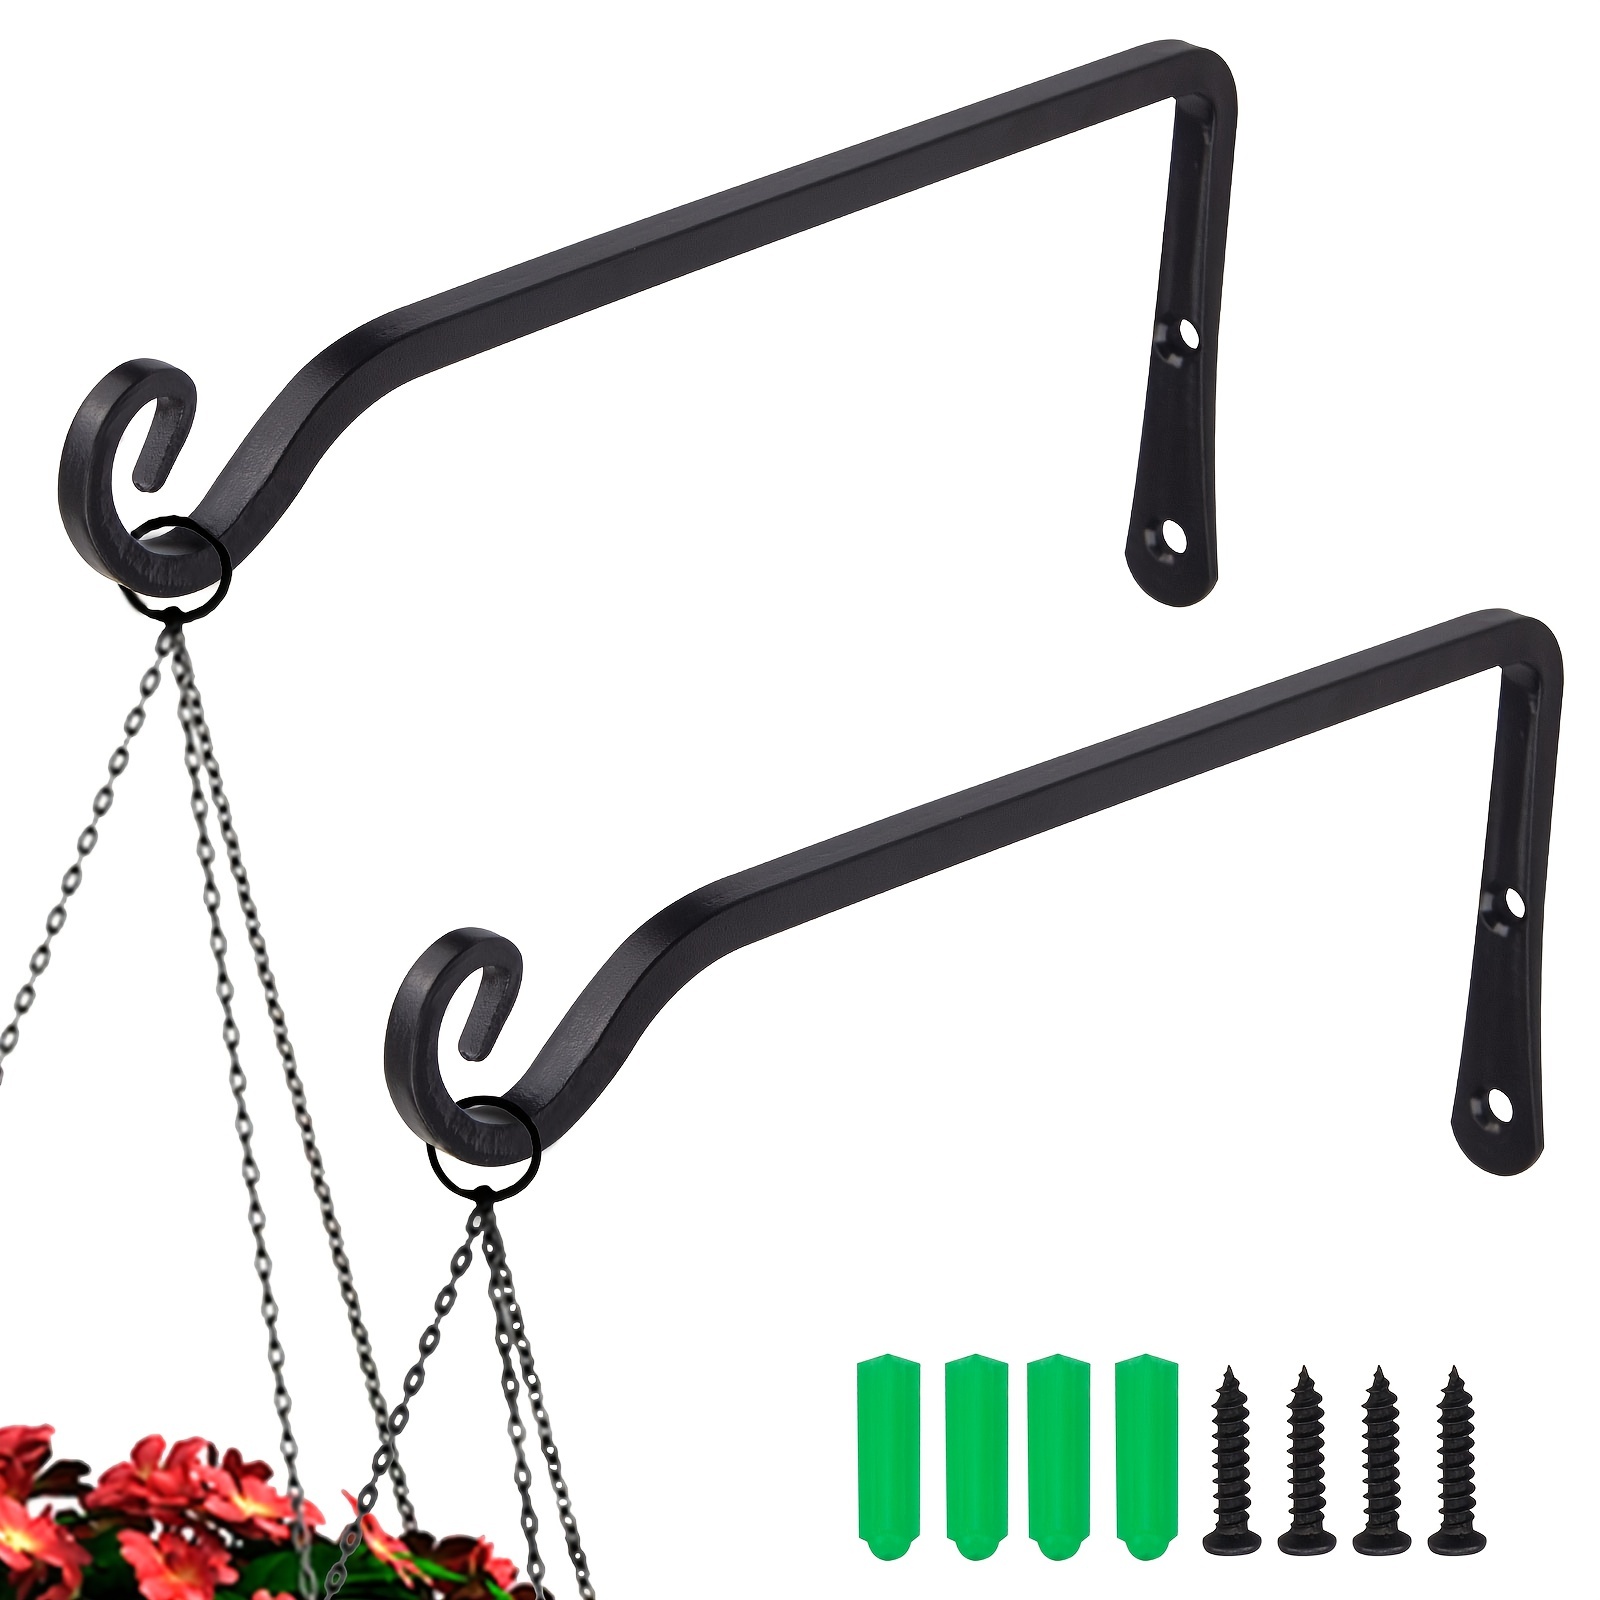 4pcs Rustic Iron Wall Hooks Perfect For Plant Hangers Lights